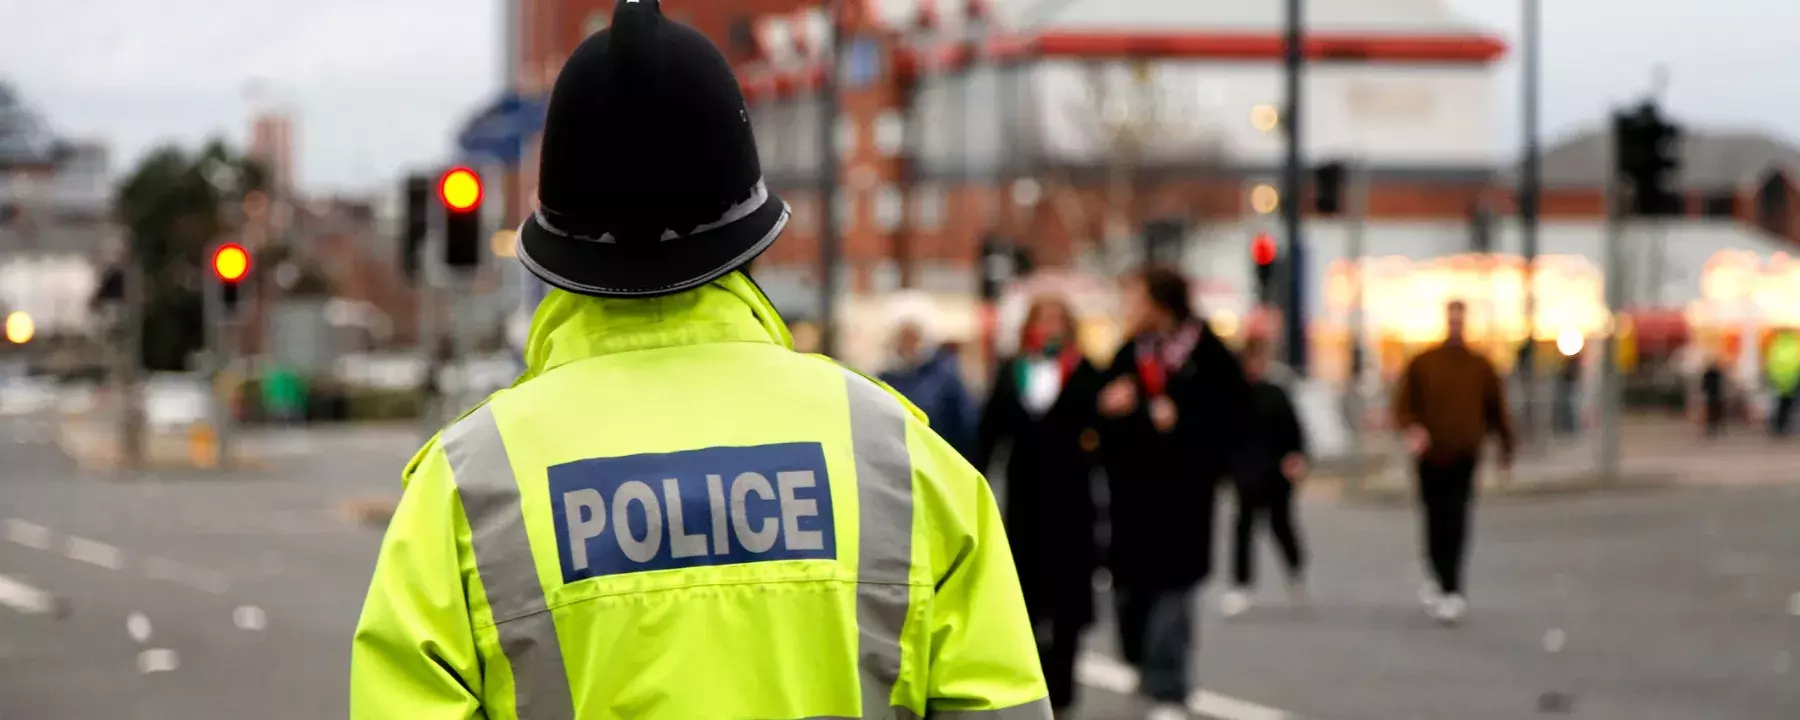 Helping police forces to prevent crime through tracking technology